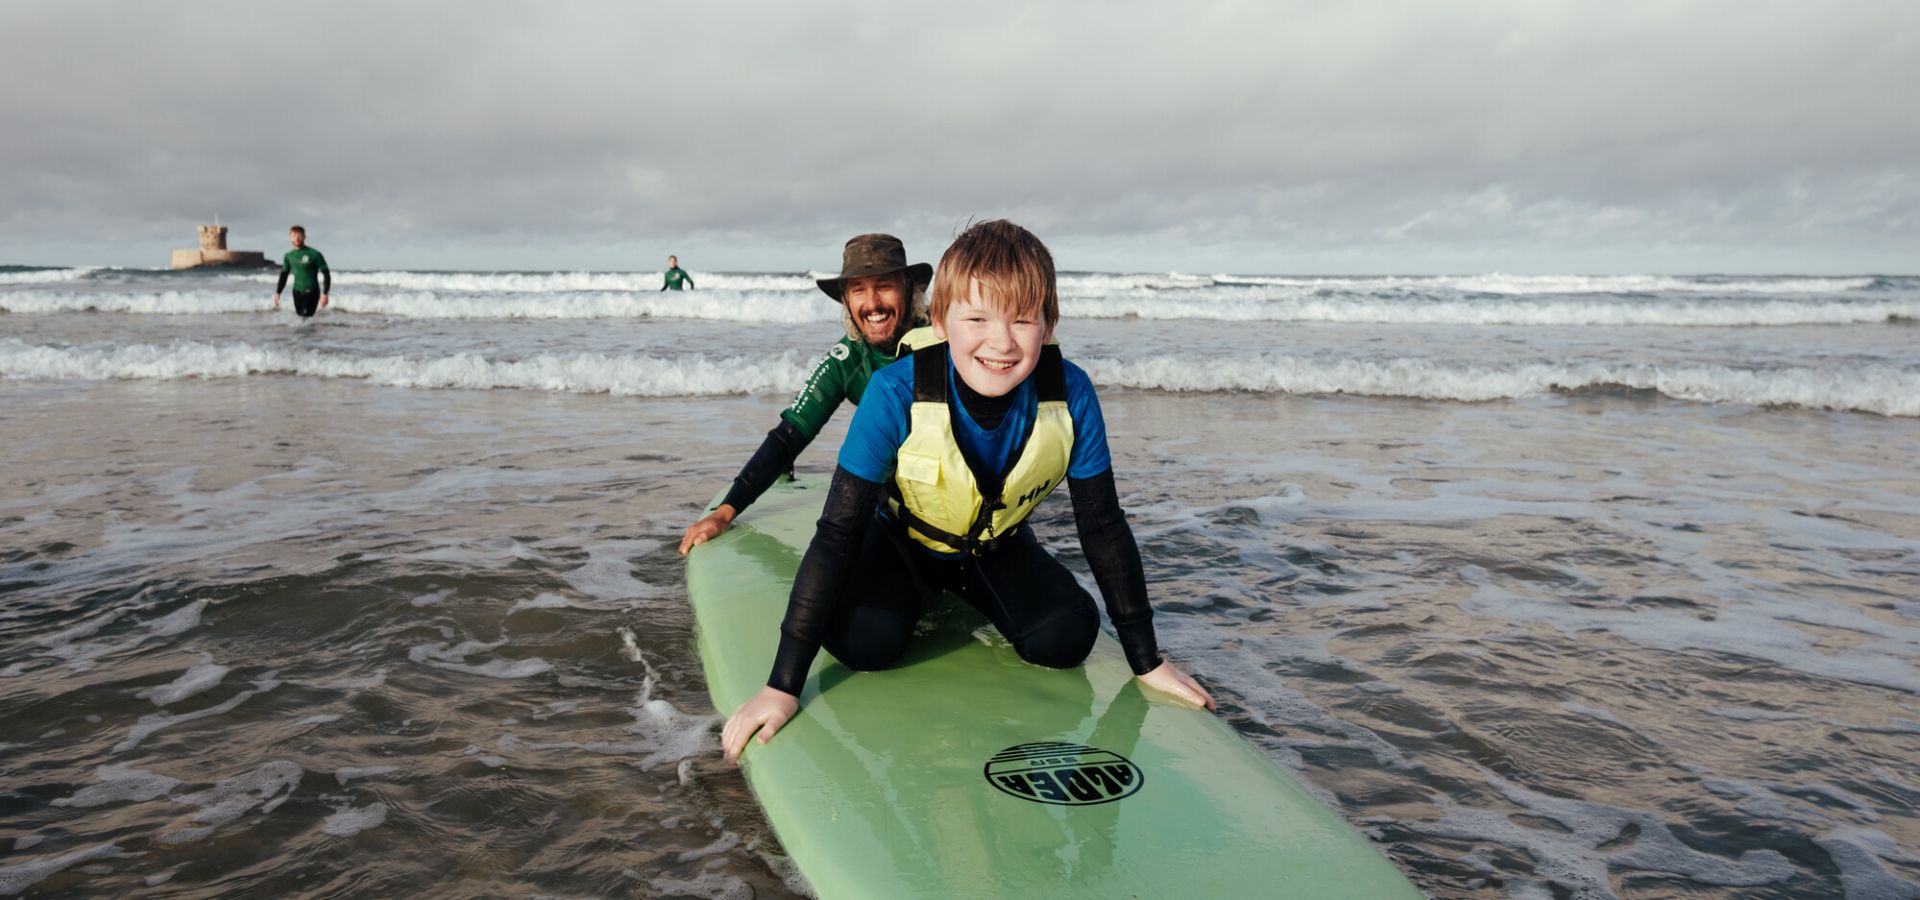 Young boy with additional needs on a surf board, being helped by a coach